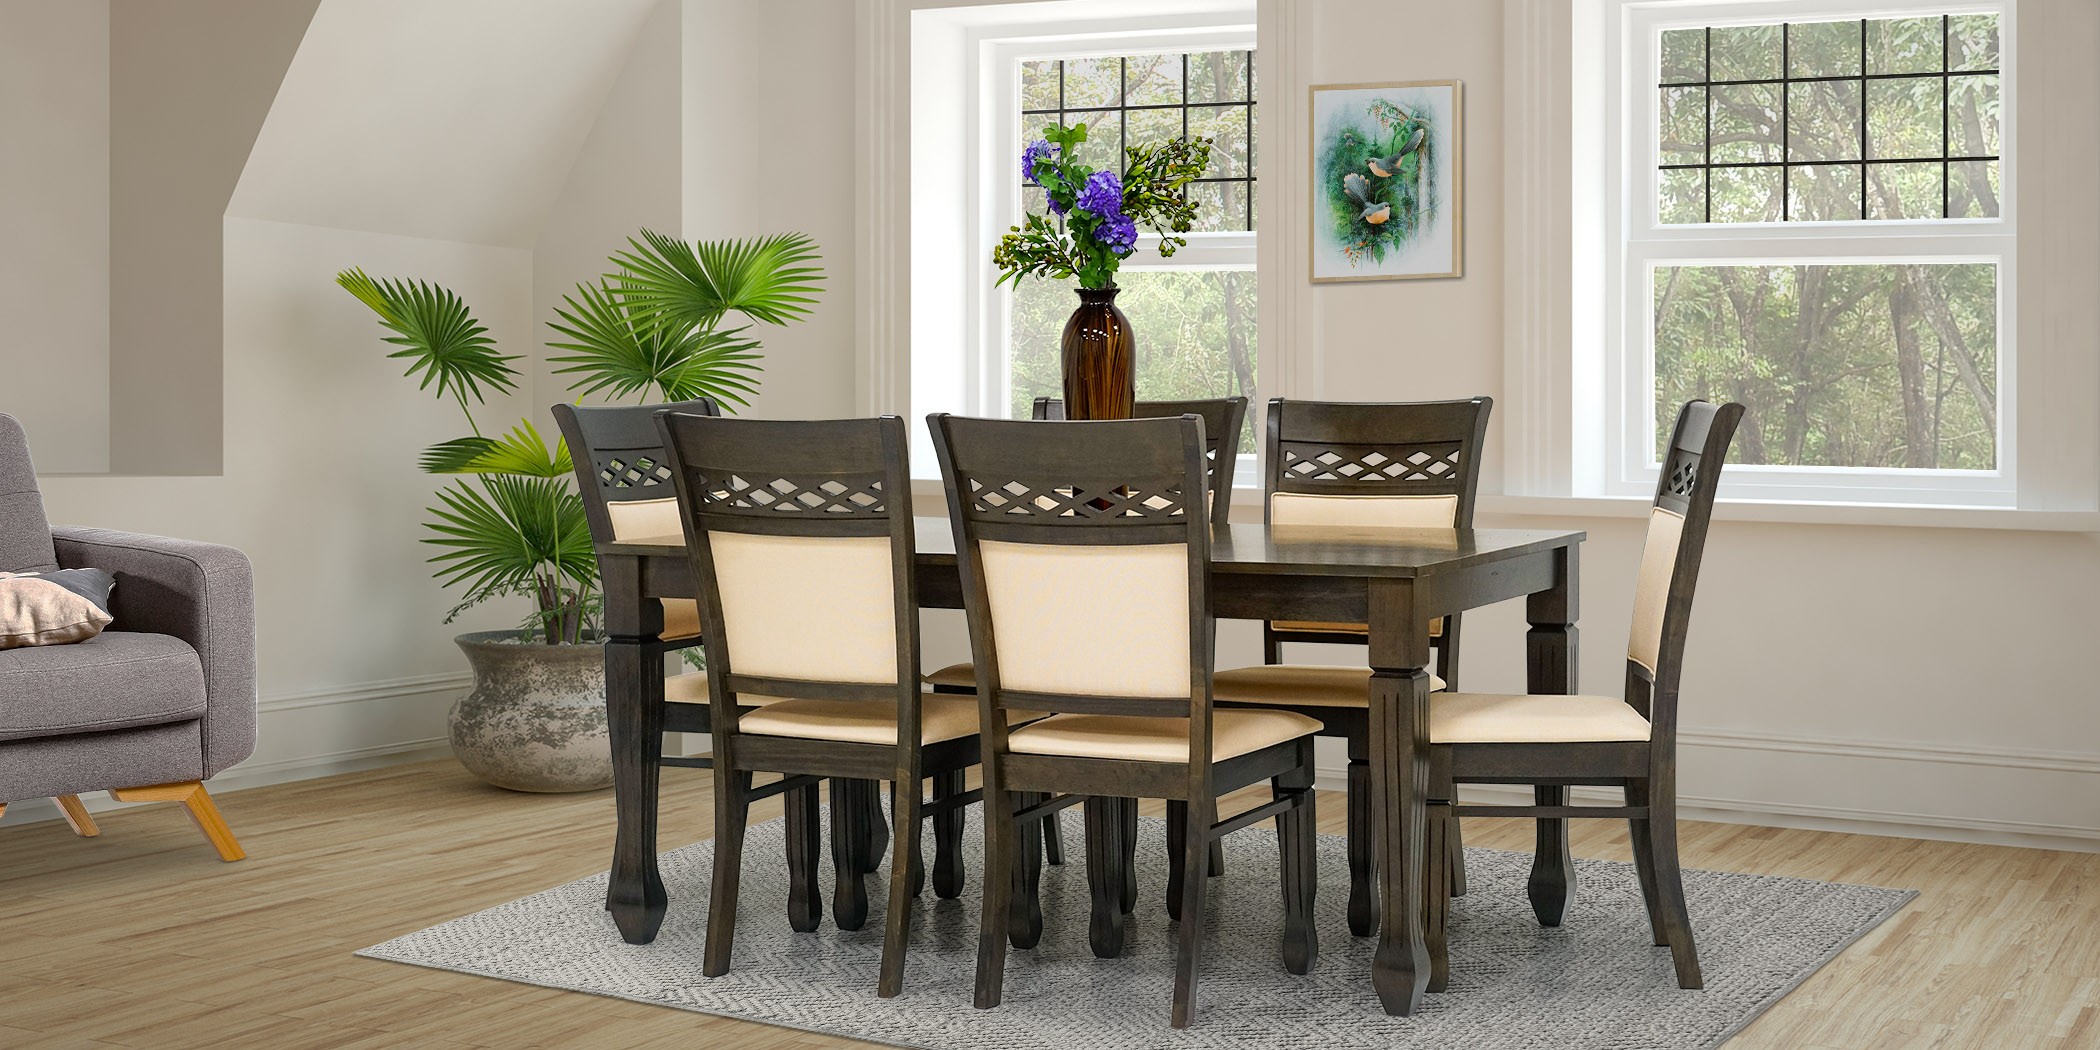 Delisa Table and 6 chairs Rubberwood Diana Color